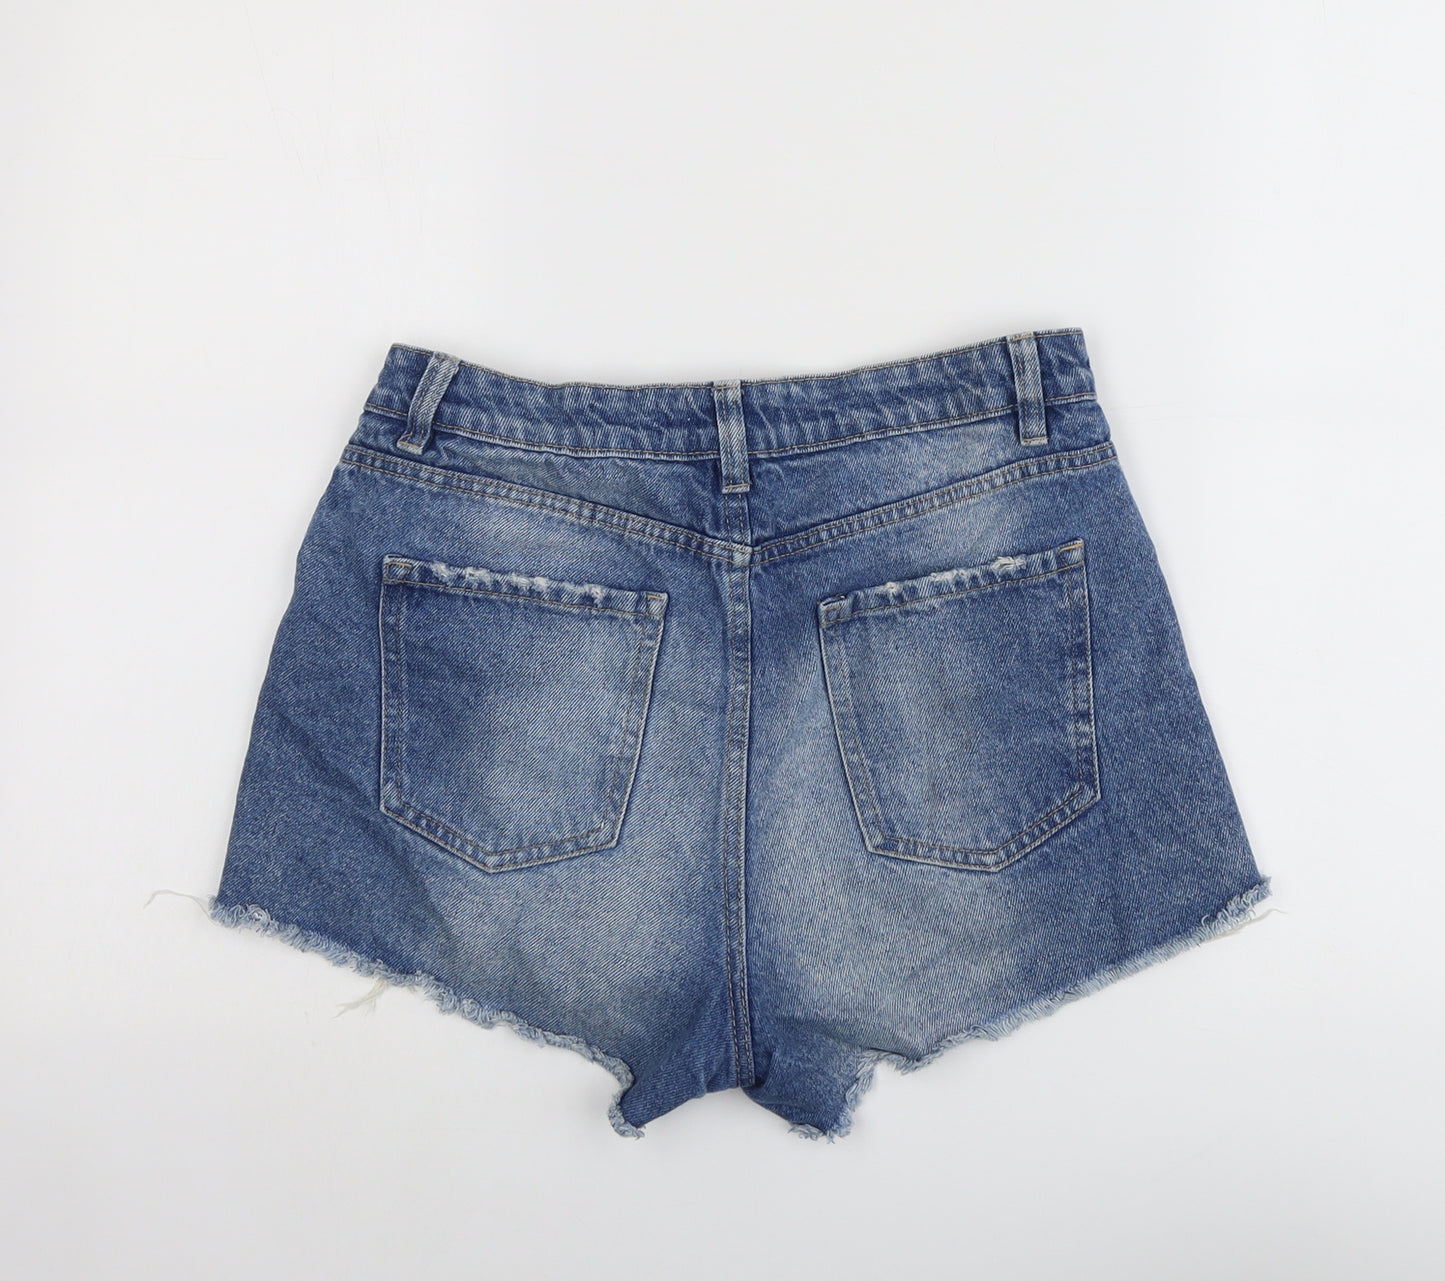 New Look Womens Blue Cotton Mom Shorts Size 10 L3 in Regular Button - Distressed Look